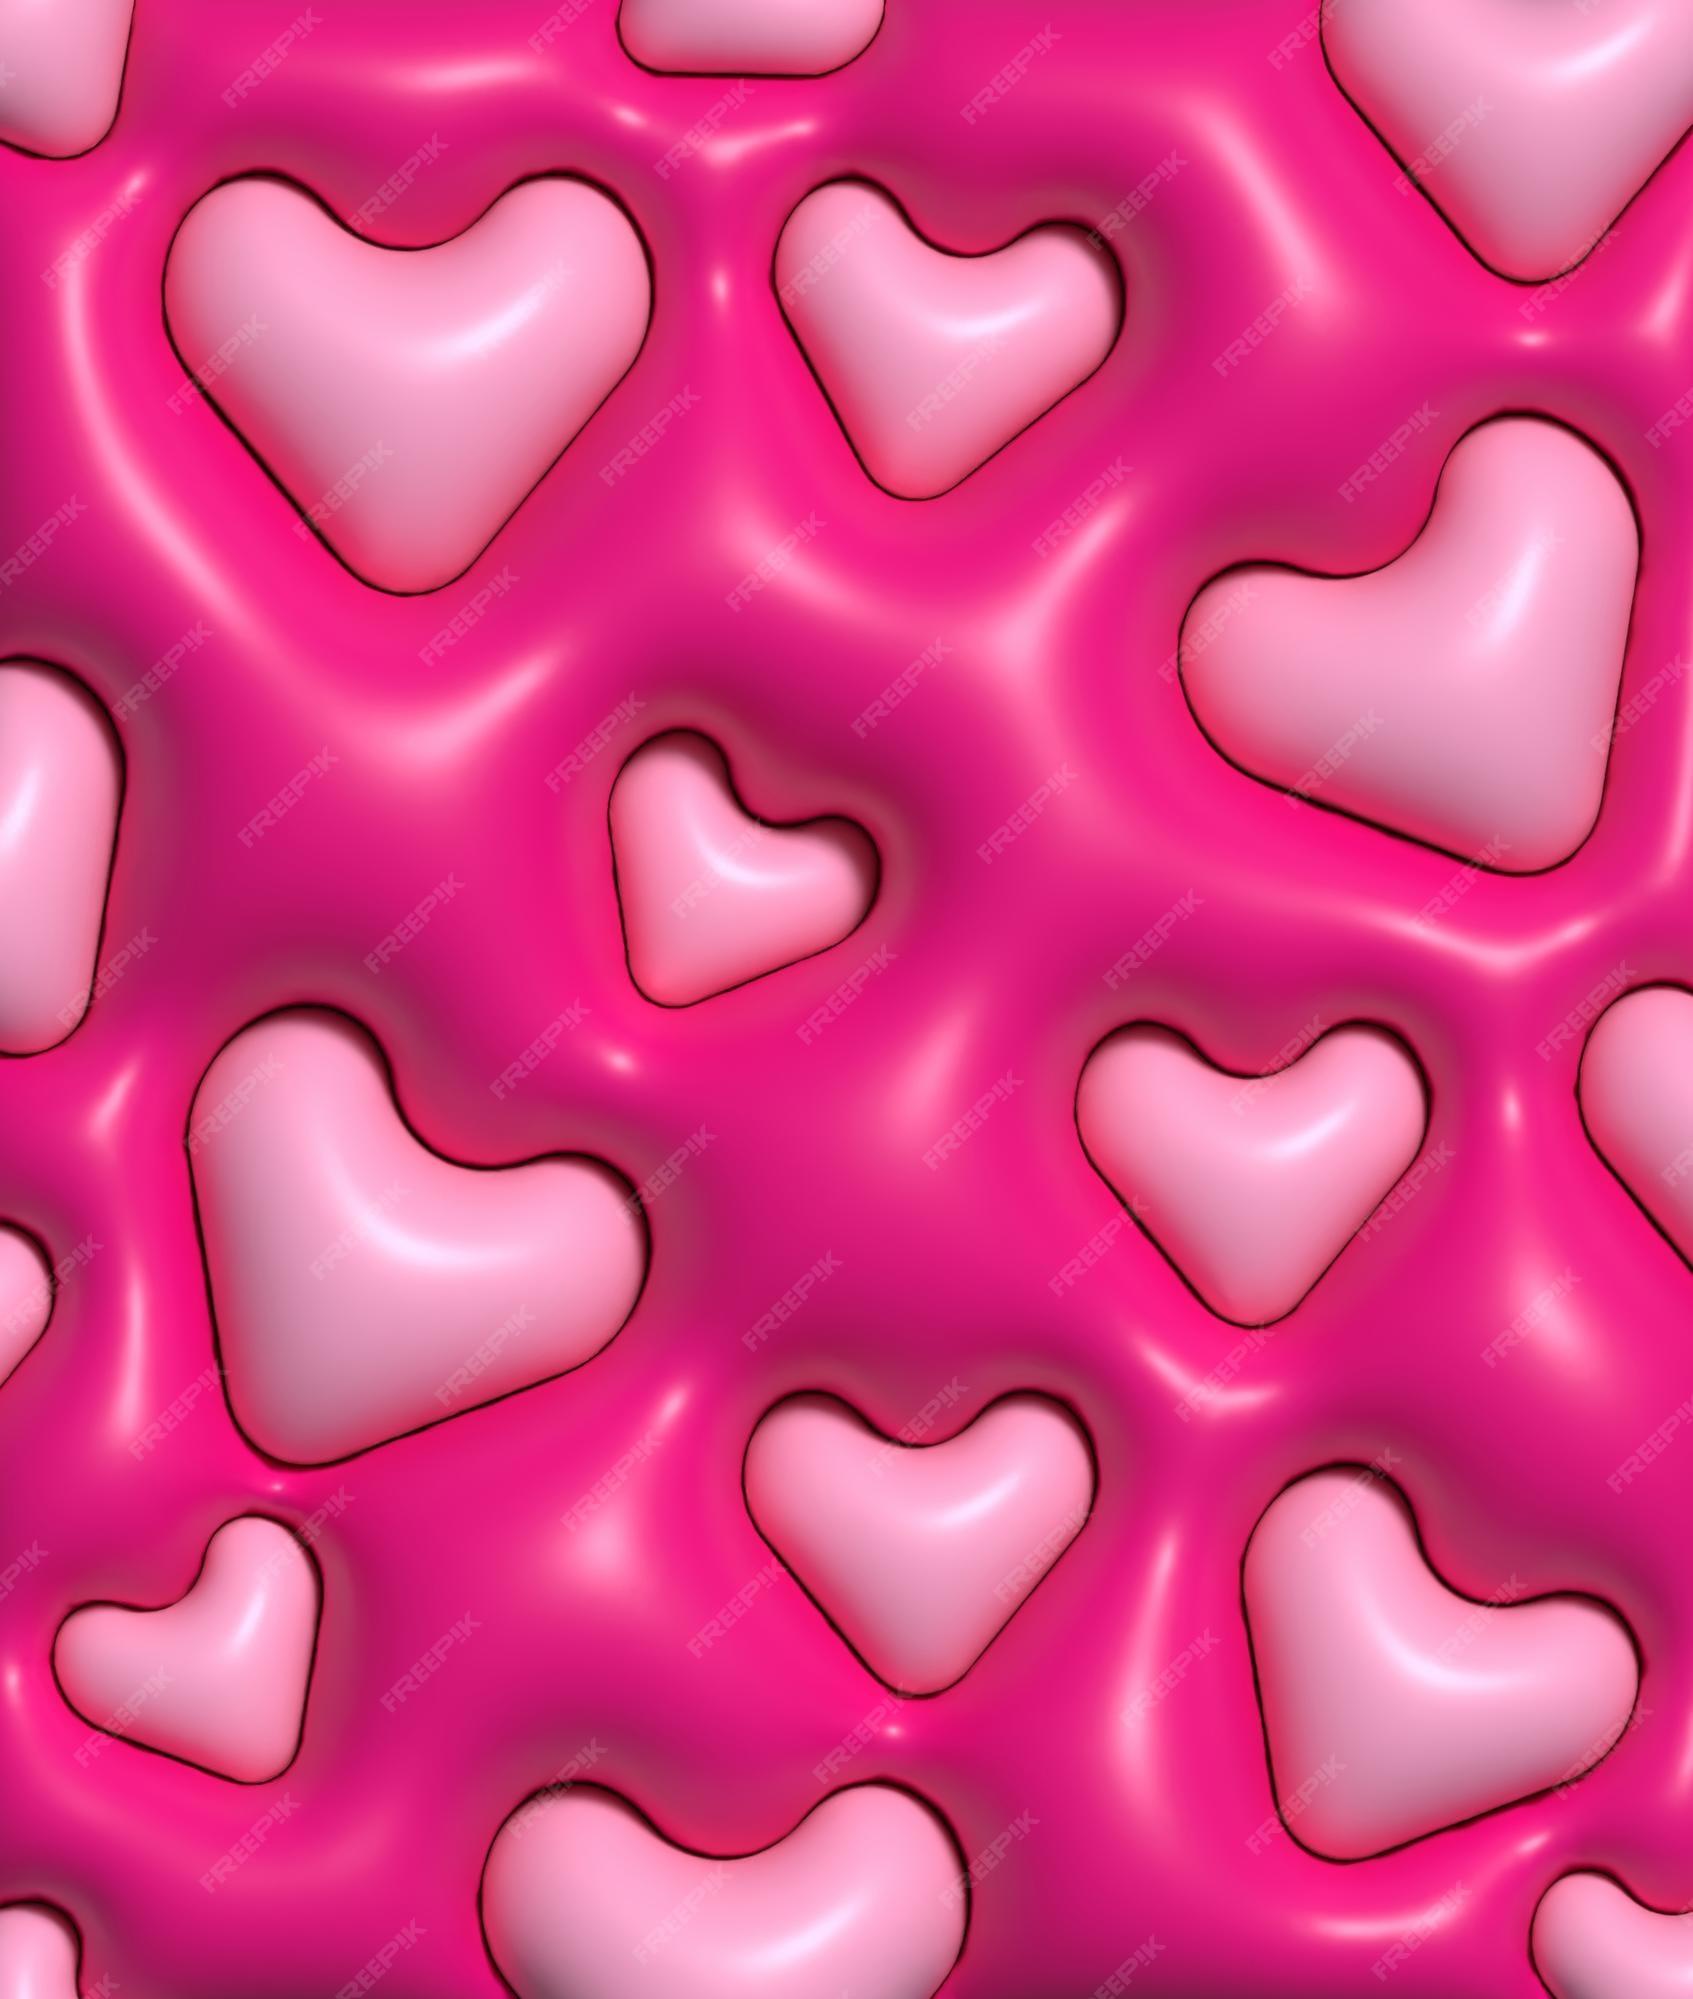 Premium Photo Abstract Pink Background With Red Hearts Wallpaper